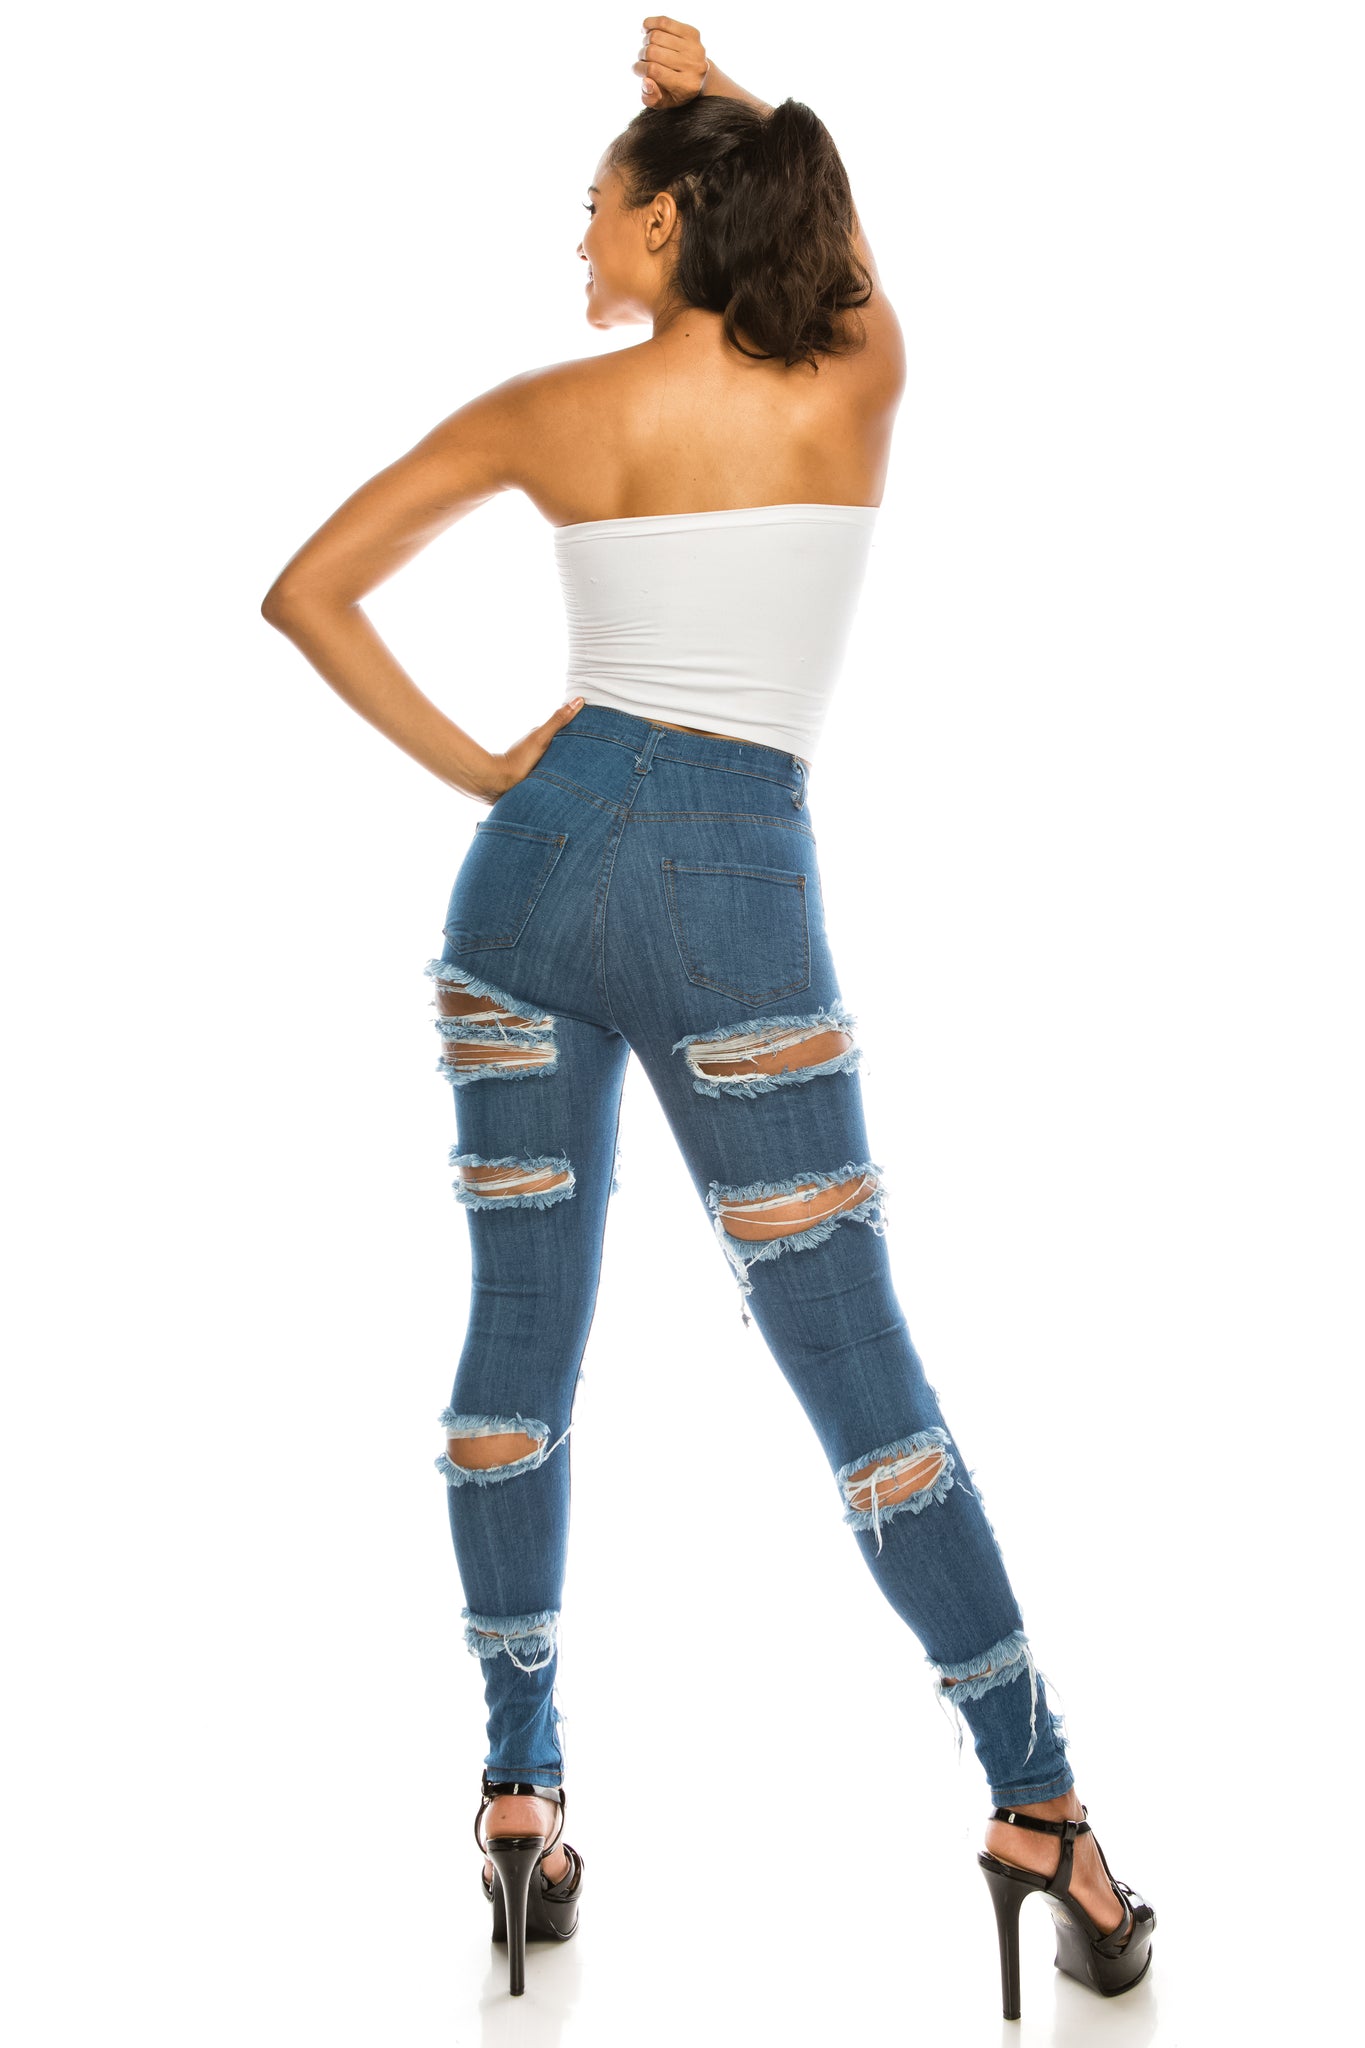 Aphrodite High Waisted Jeans for Women - Plus Size Hand Sanding